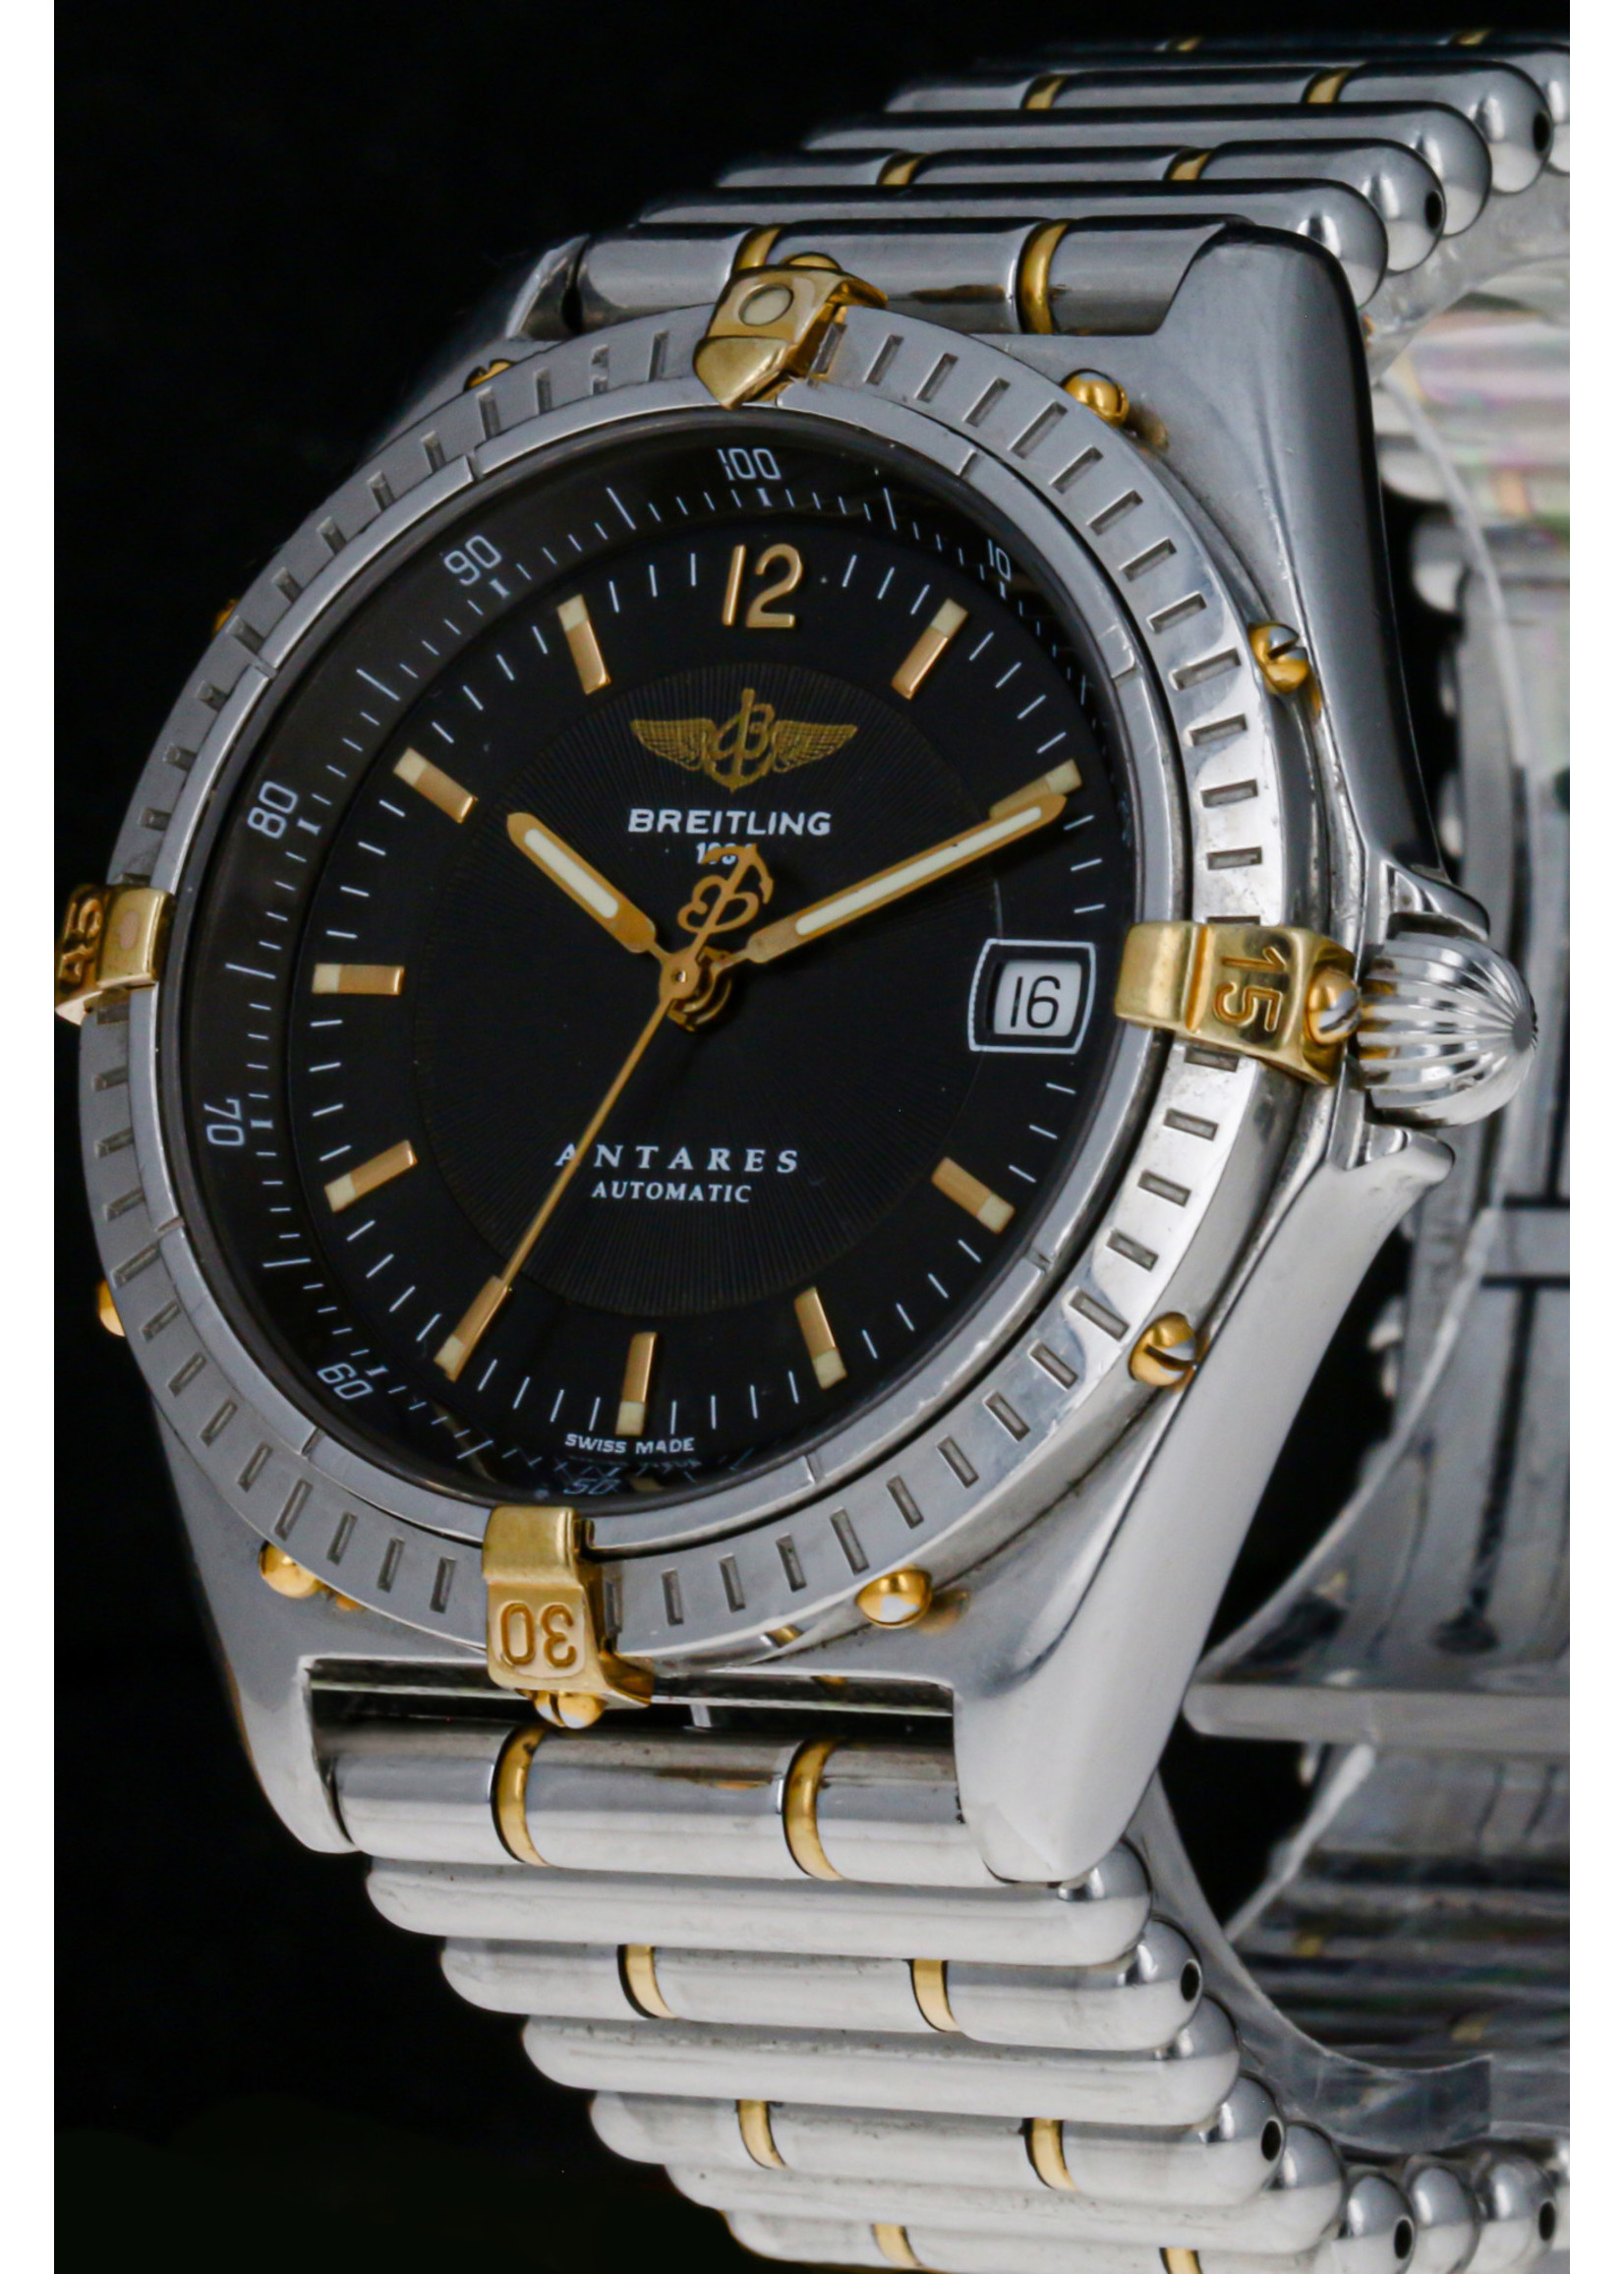 Breitling BREITLING ANTARES 39MM TWO TONE #B10048